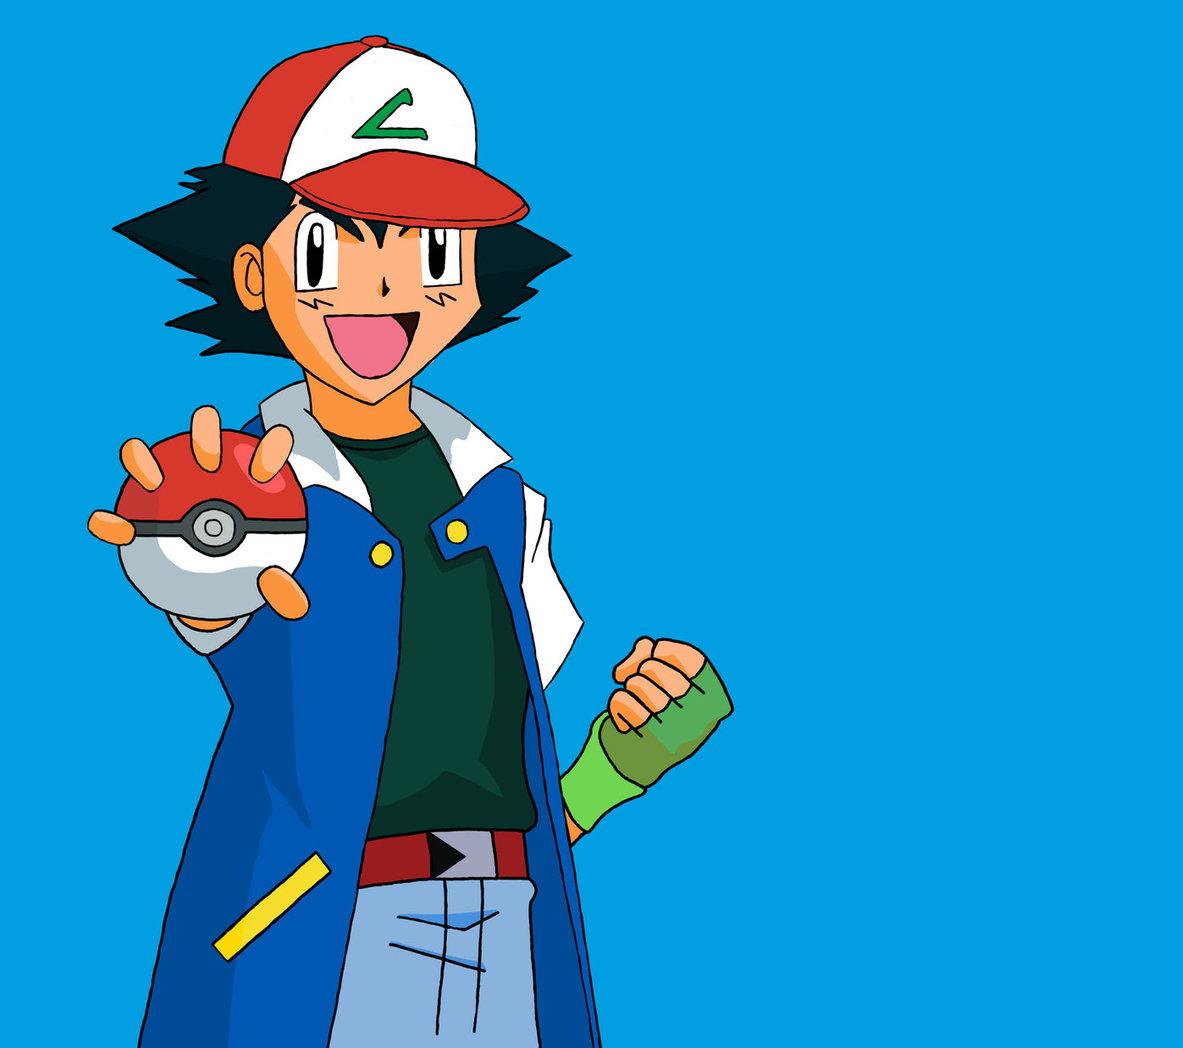 Figure 4.2 Target image of Ash from Pokemon.